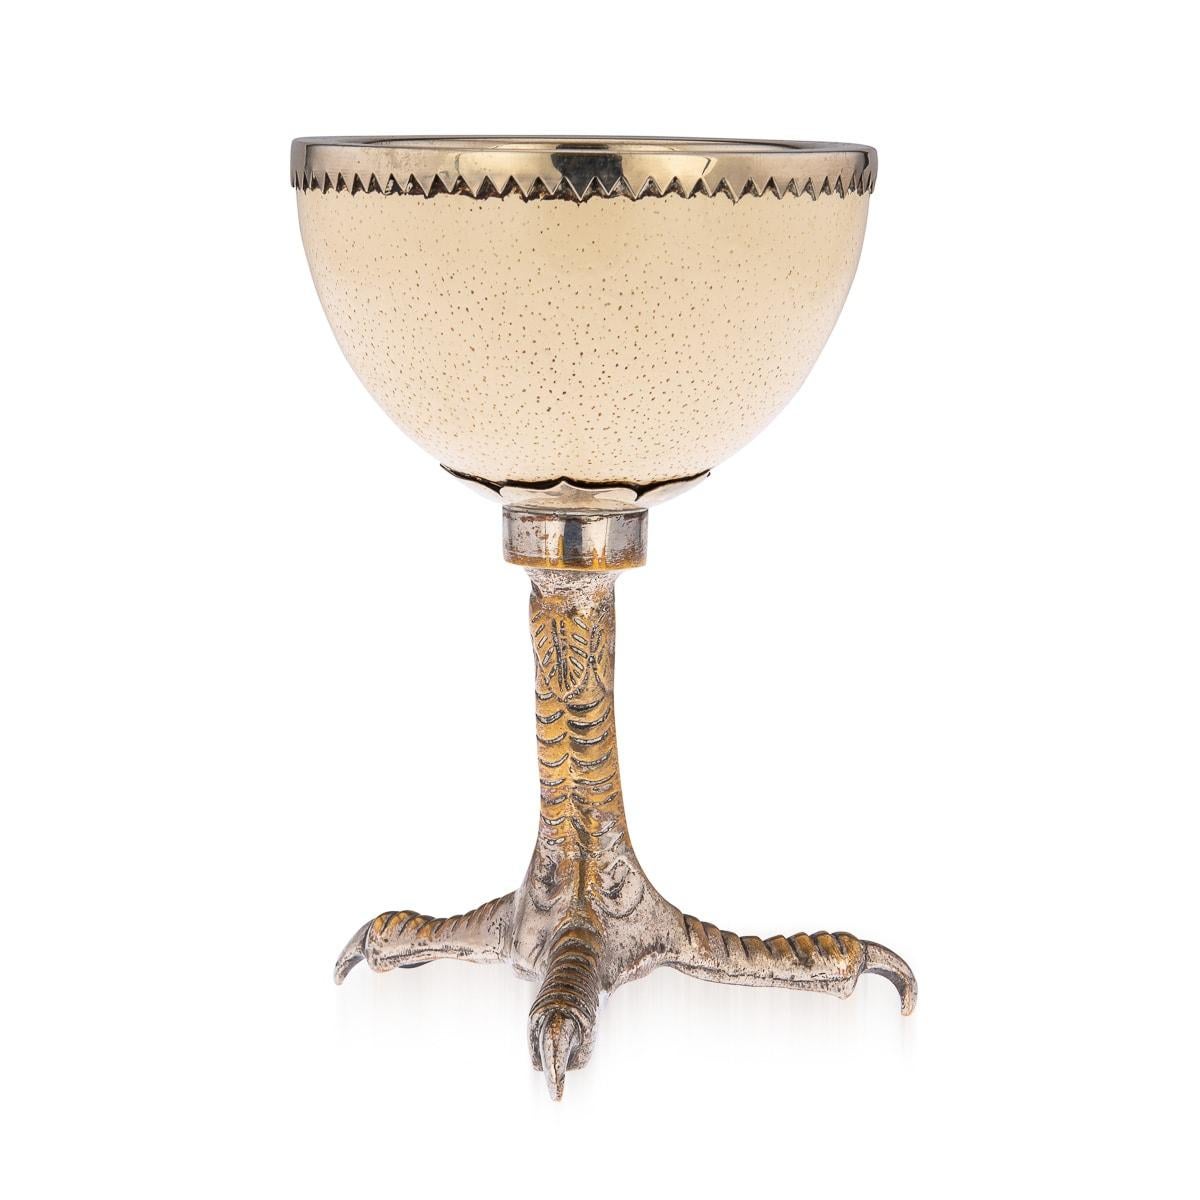 British Anthony Redmile Ostrich Egg Box Mounted on Silver Plated Cup, London, c.1970